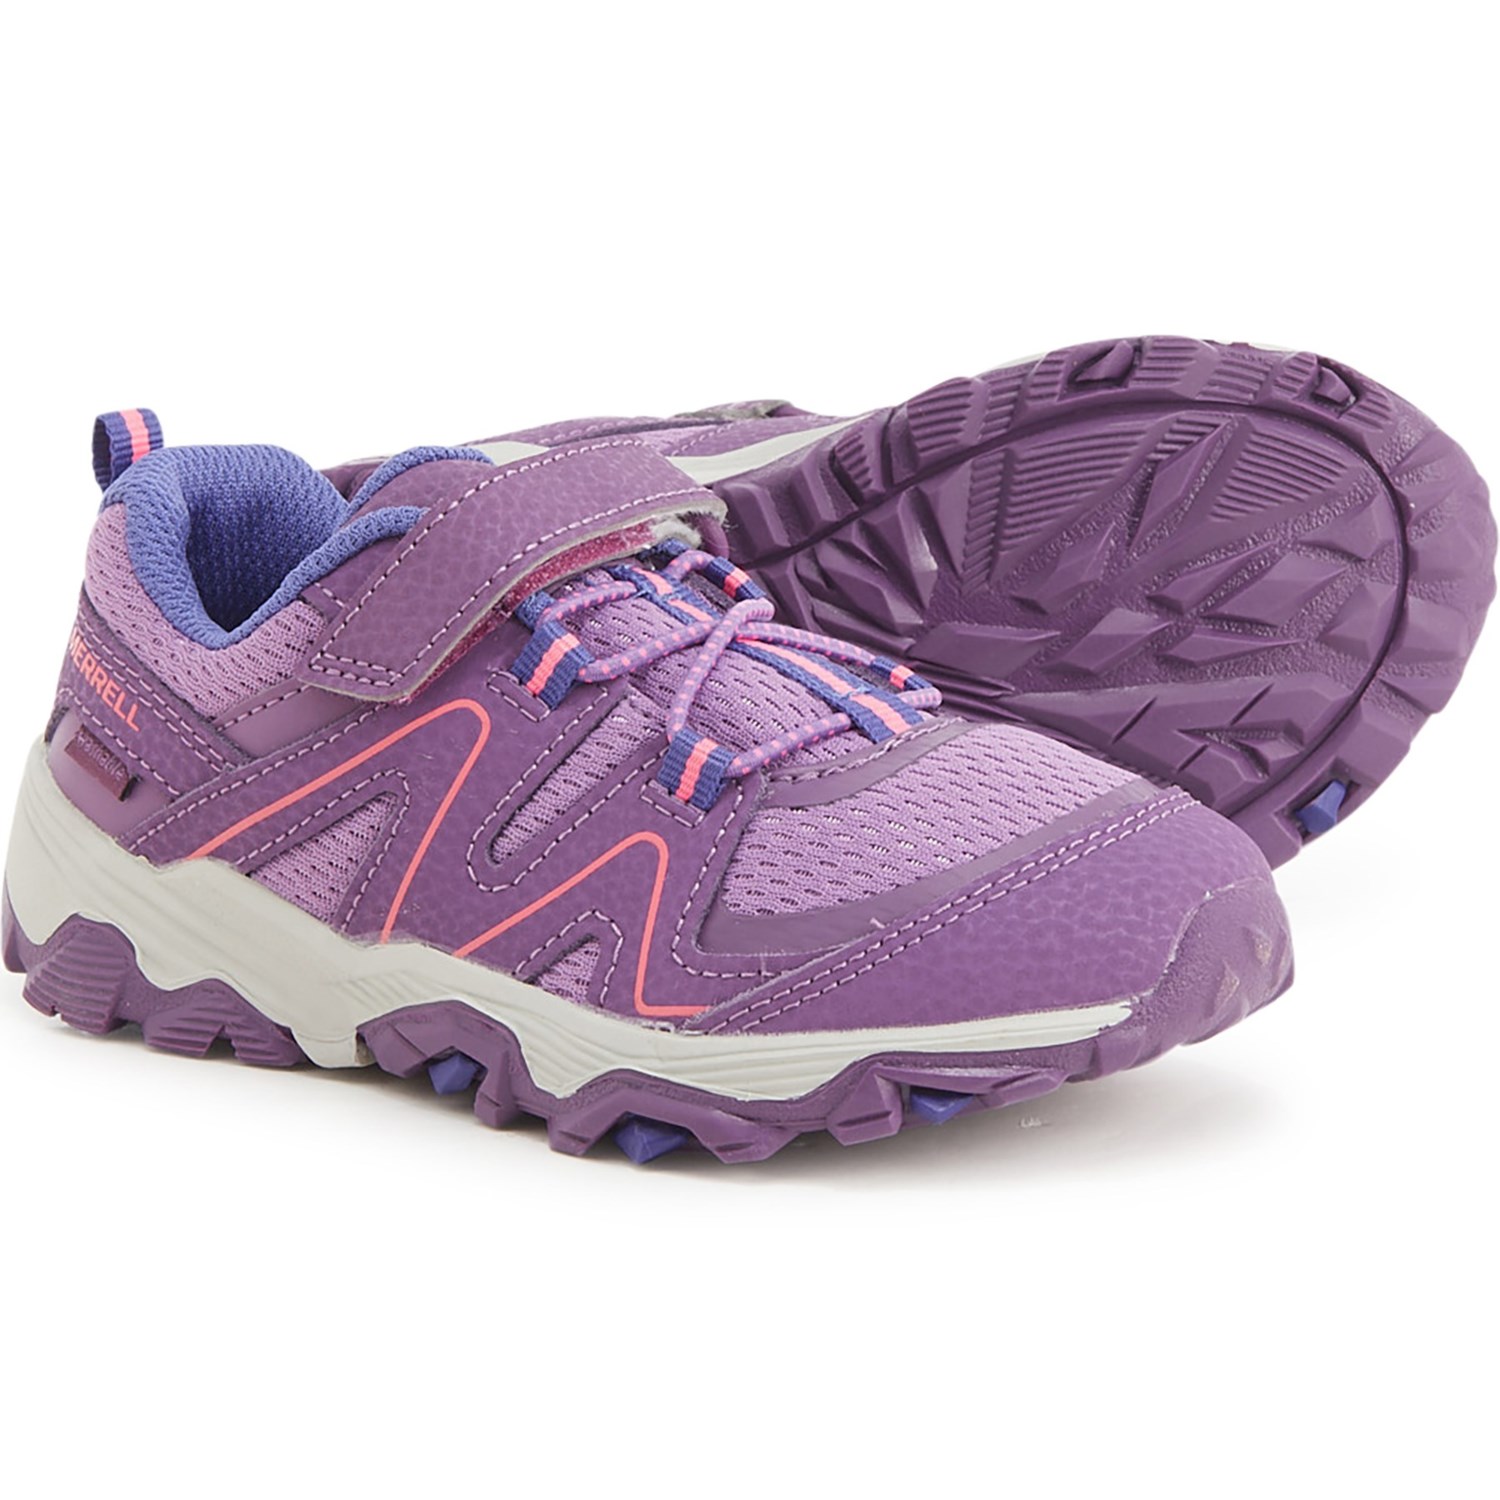 Merrell Toddler Girls Trail Quest Hiking Shoes